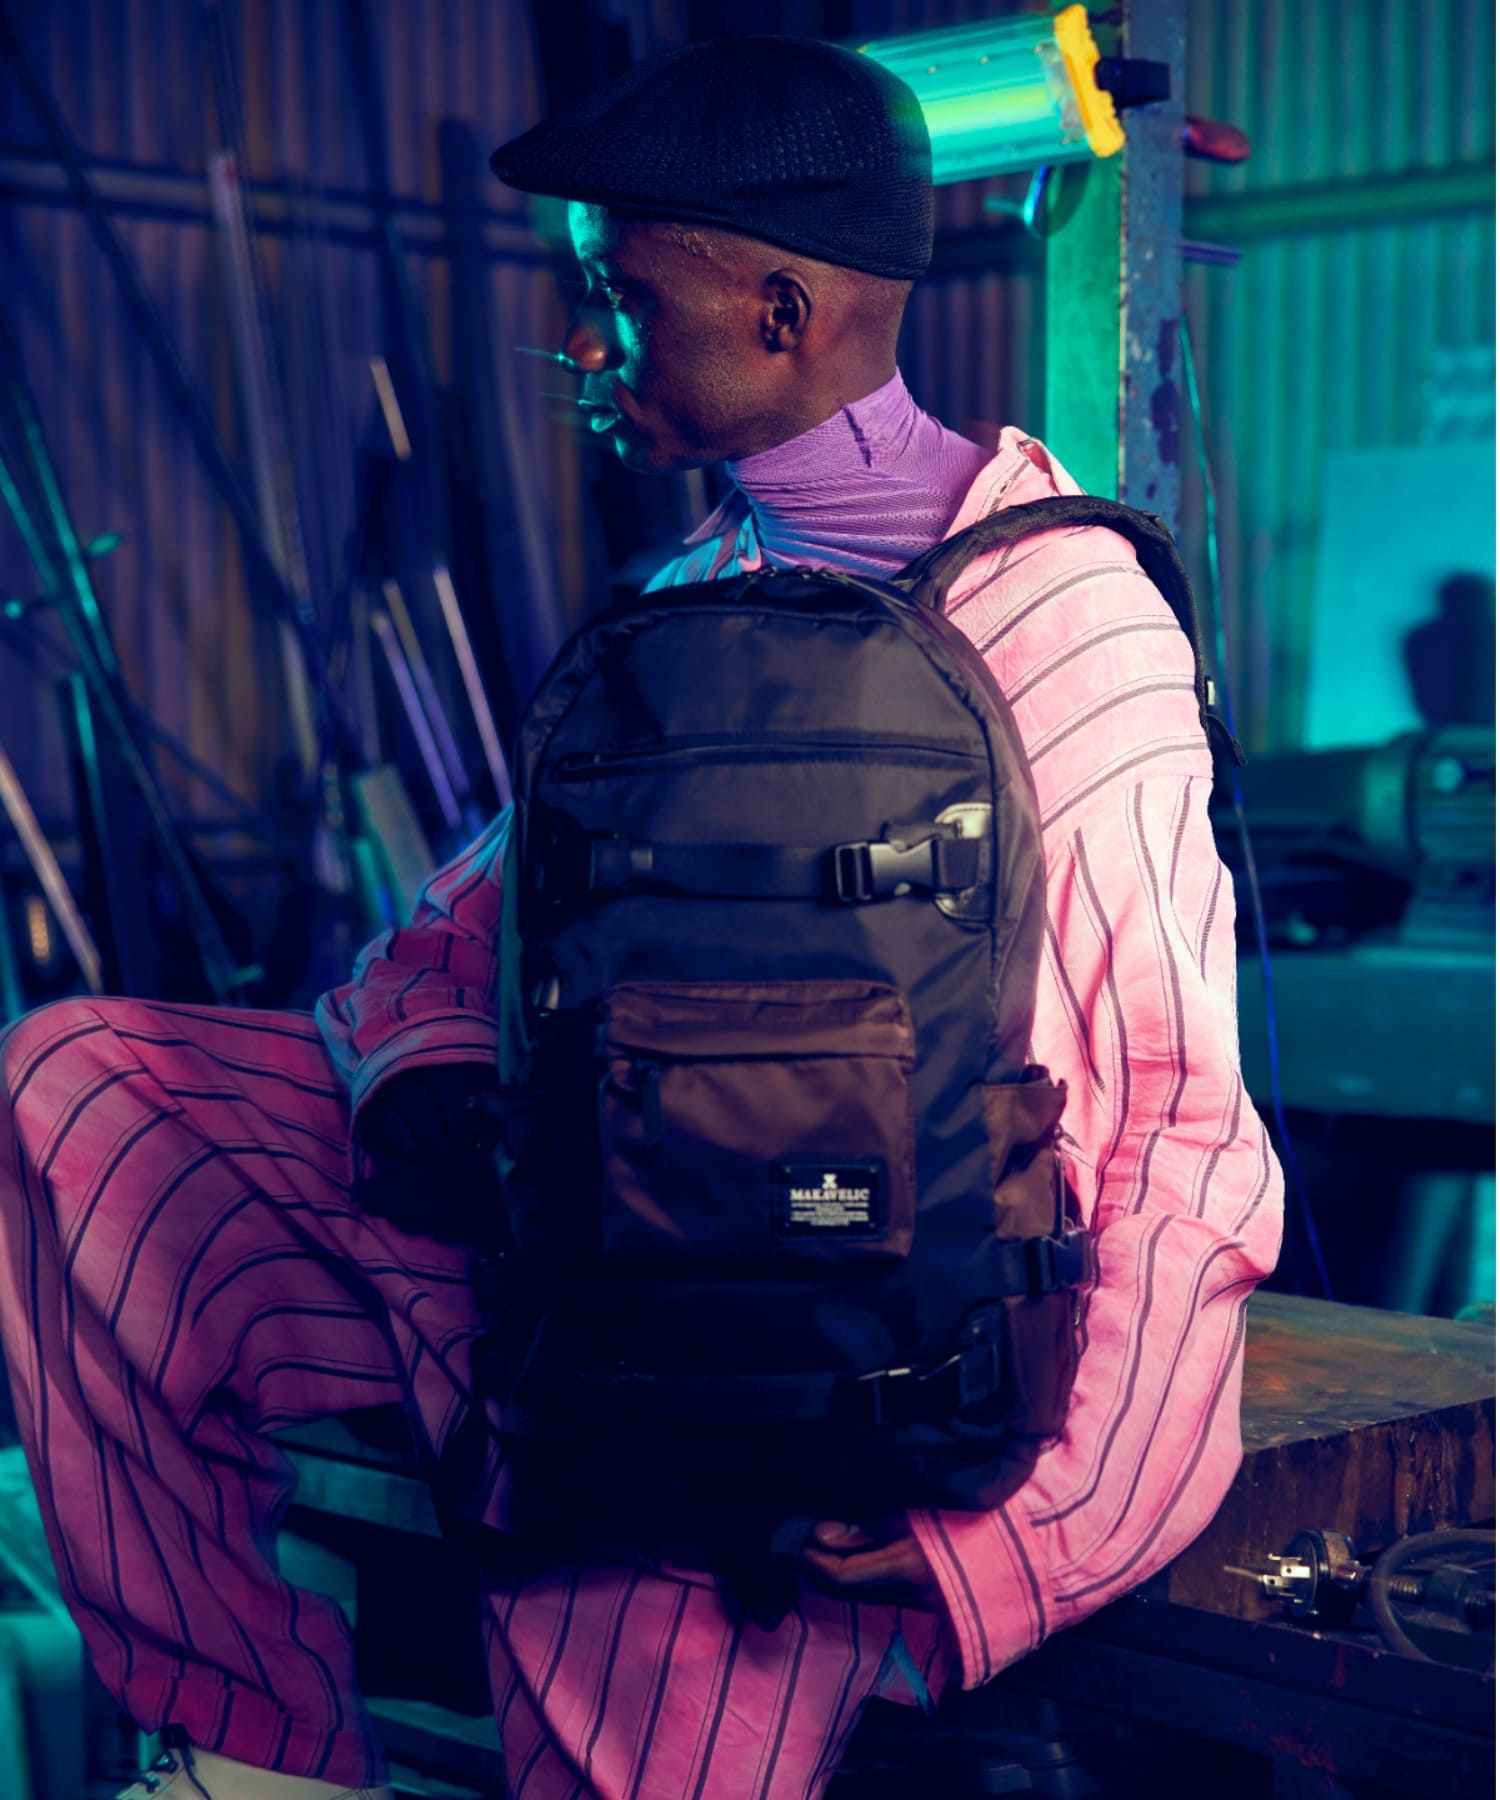 SUPERIORITY BIND UP2 BACKPACK | バックパック｜メンズバッグ通販の